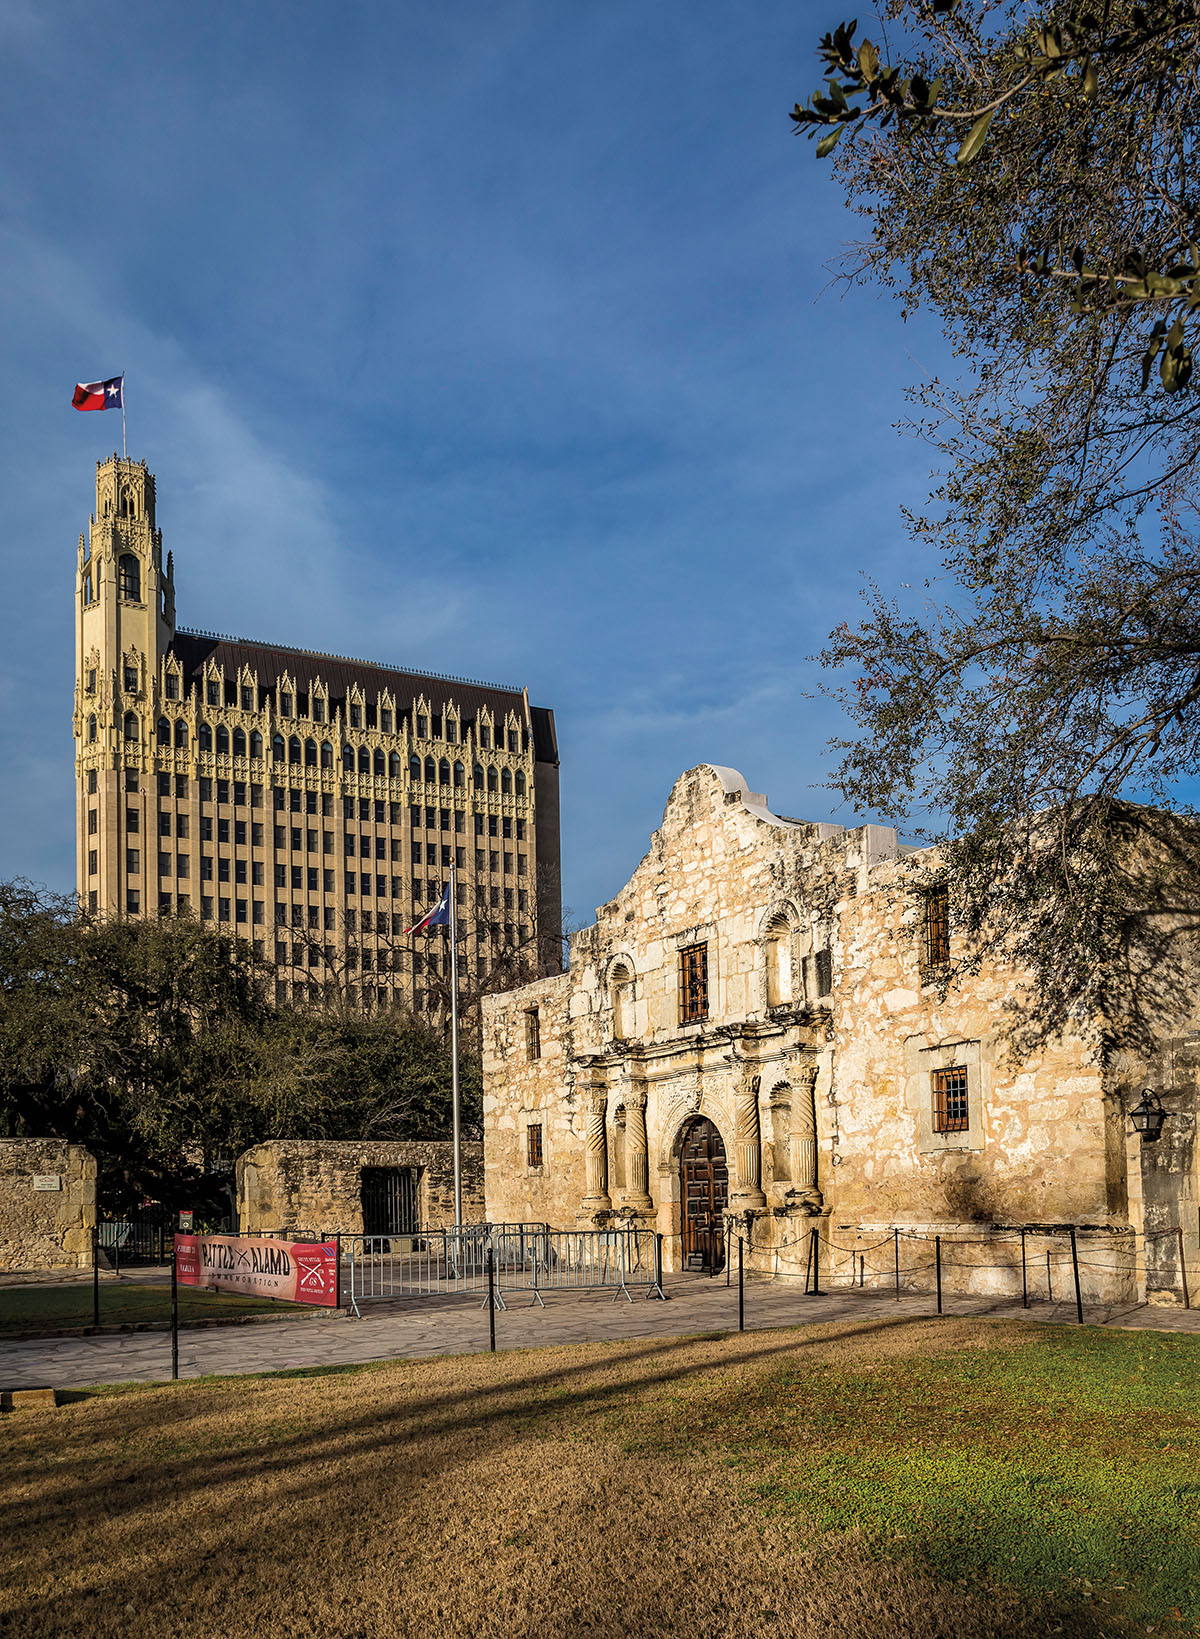 The stone facade of the Alamo in front of a taller building in the background